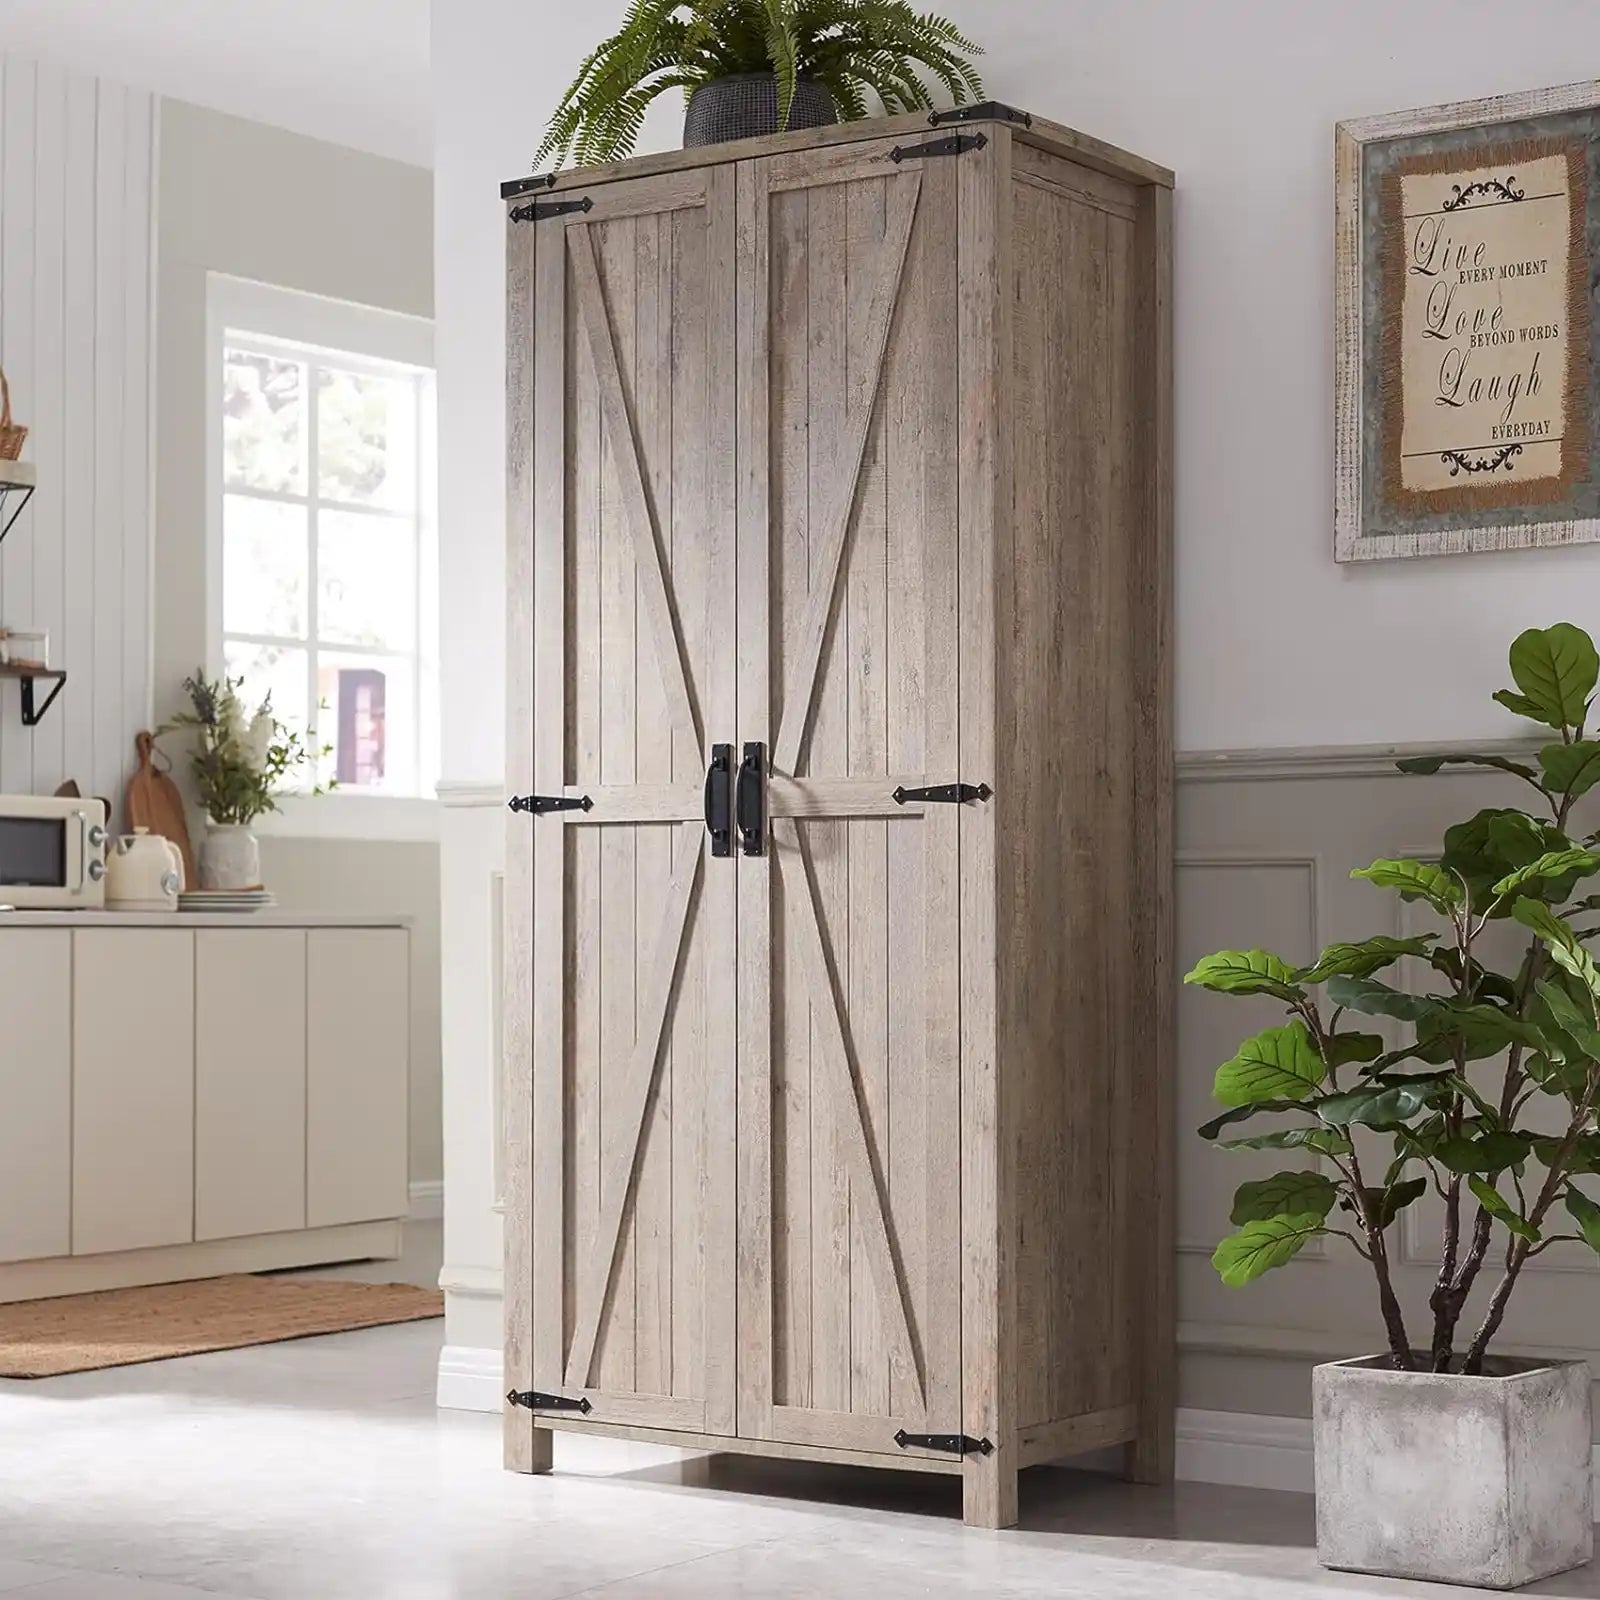 Storage Cabinet, Farmhouse Bathroom Organizer with Adjustable Shelves, Narrow Kitchen Pantry w/Barn Door, Versatile Storage w/Hanging Rod for Home, Laundry, Utility Room